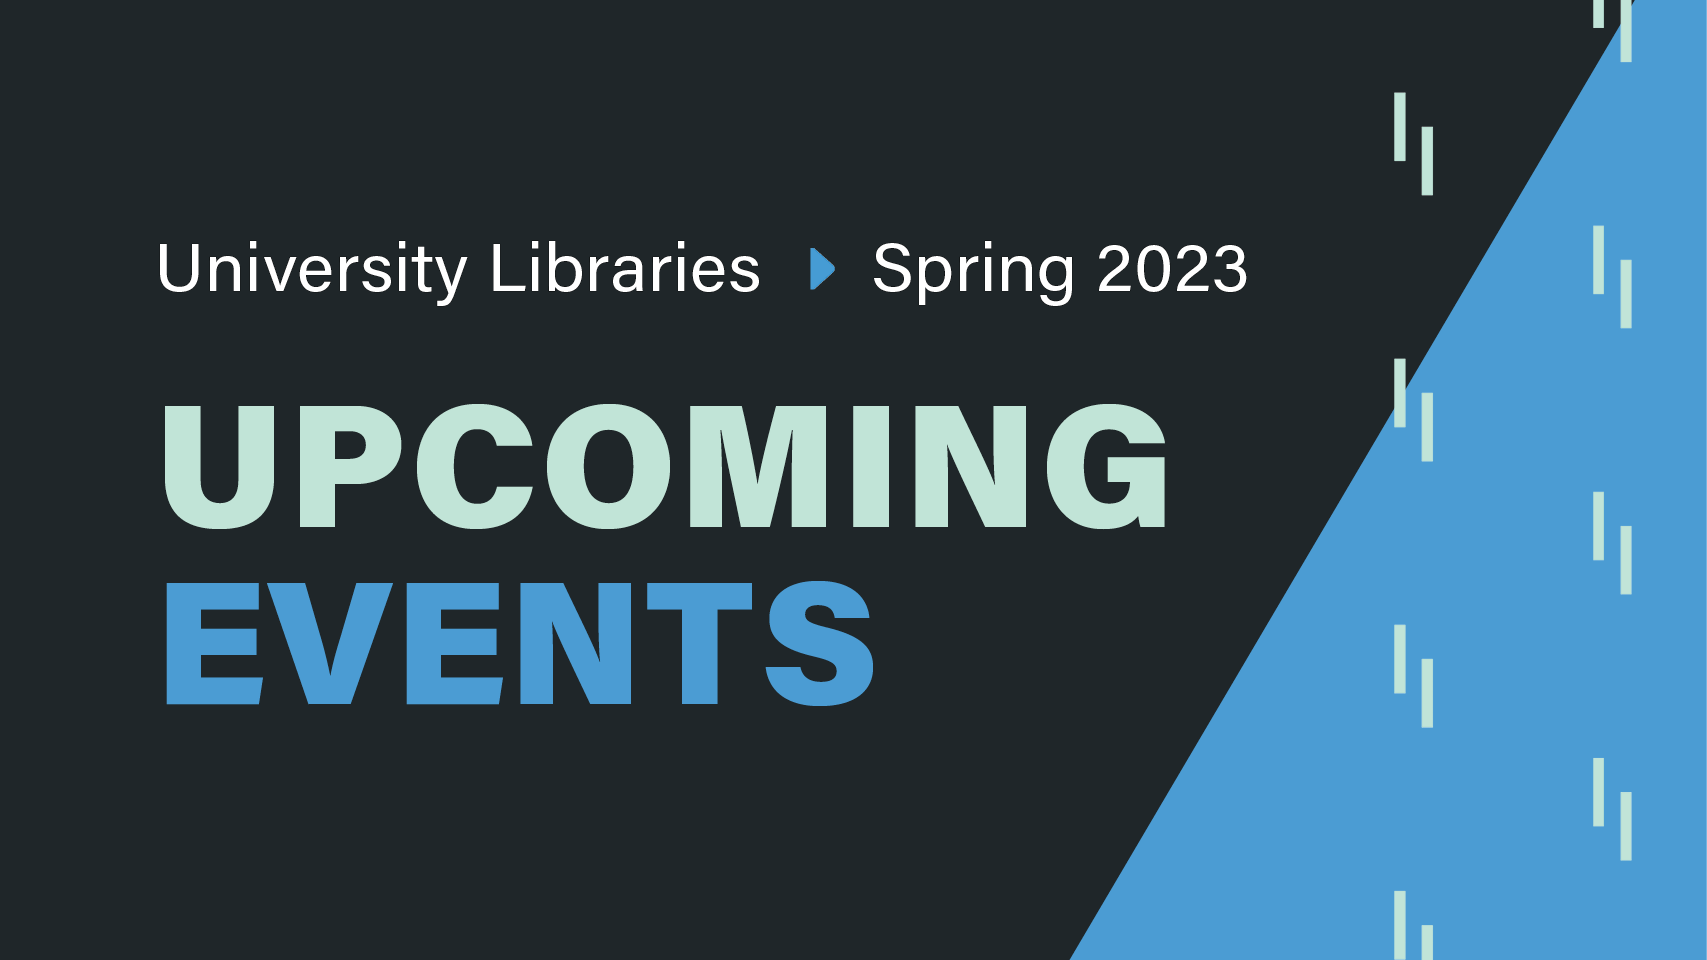 Spring 2023 events at the University Libraries